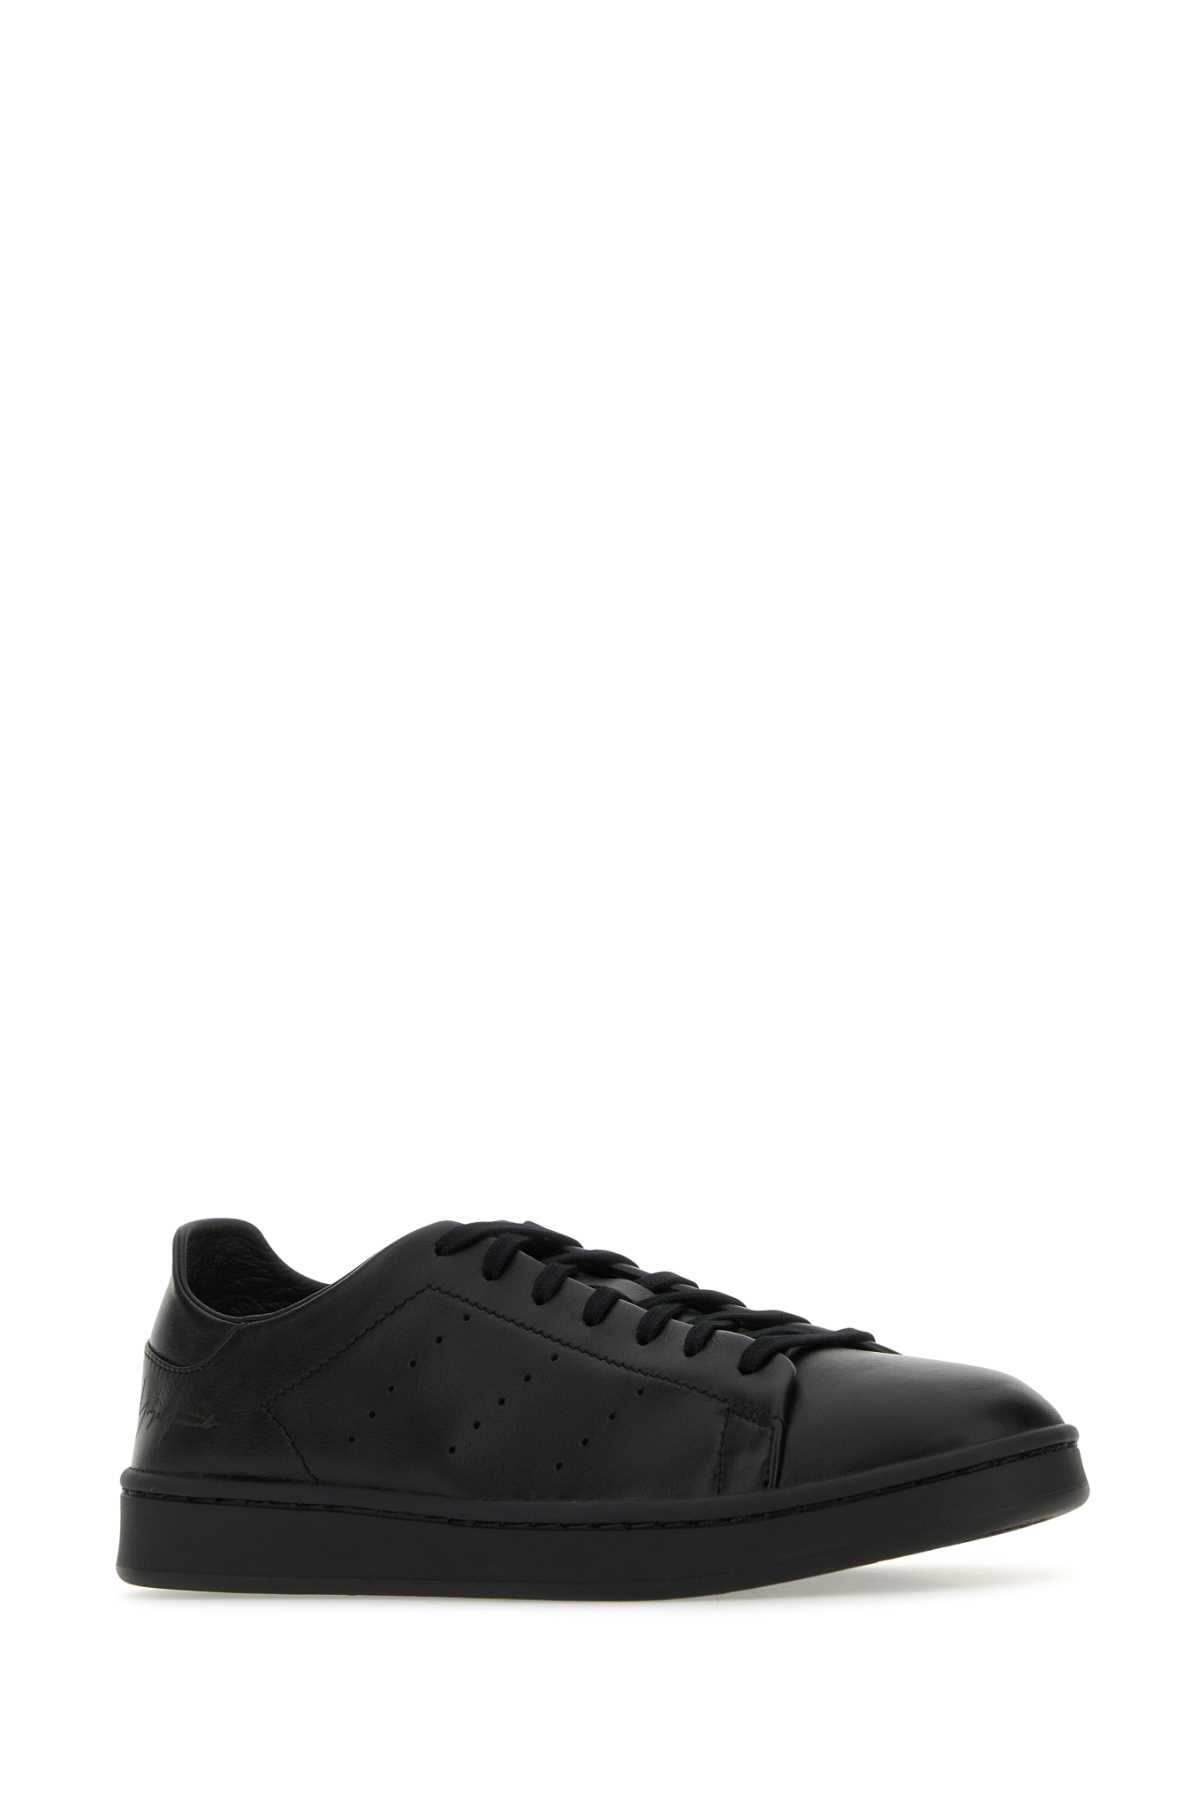 Y-3 Black Leather Stan Smith Trainers